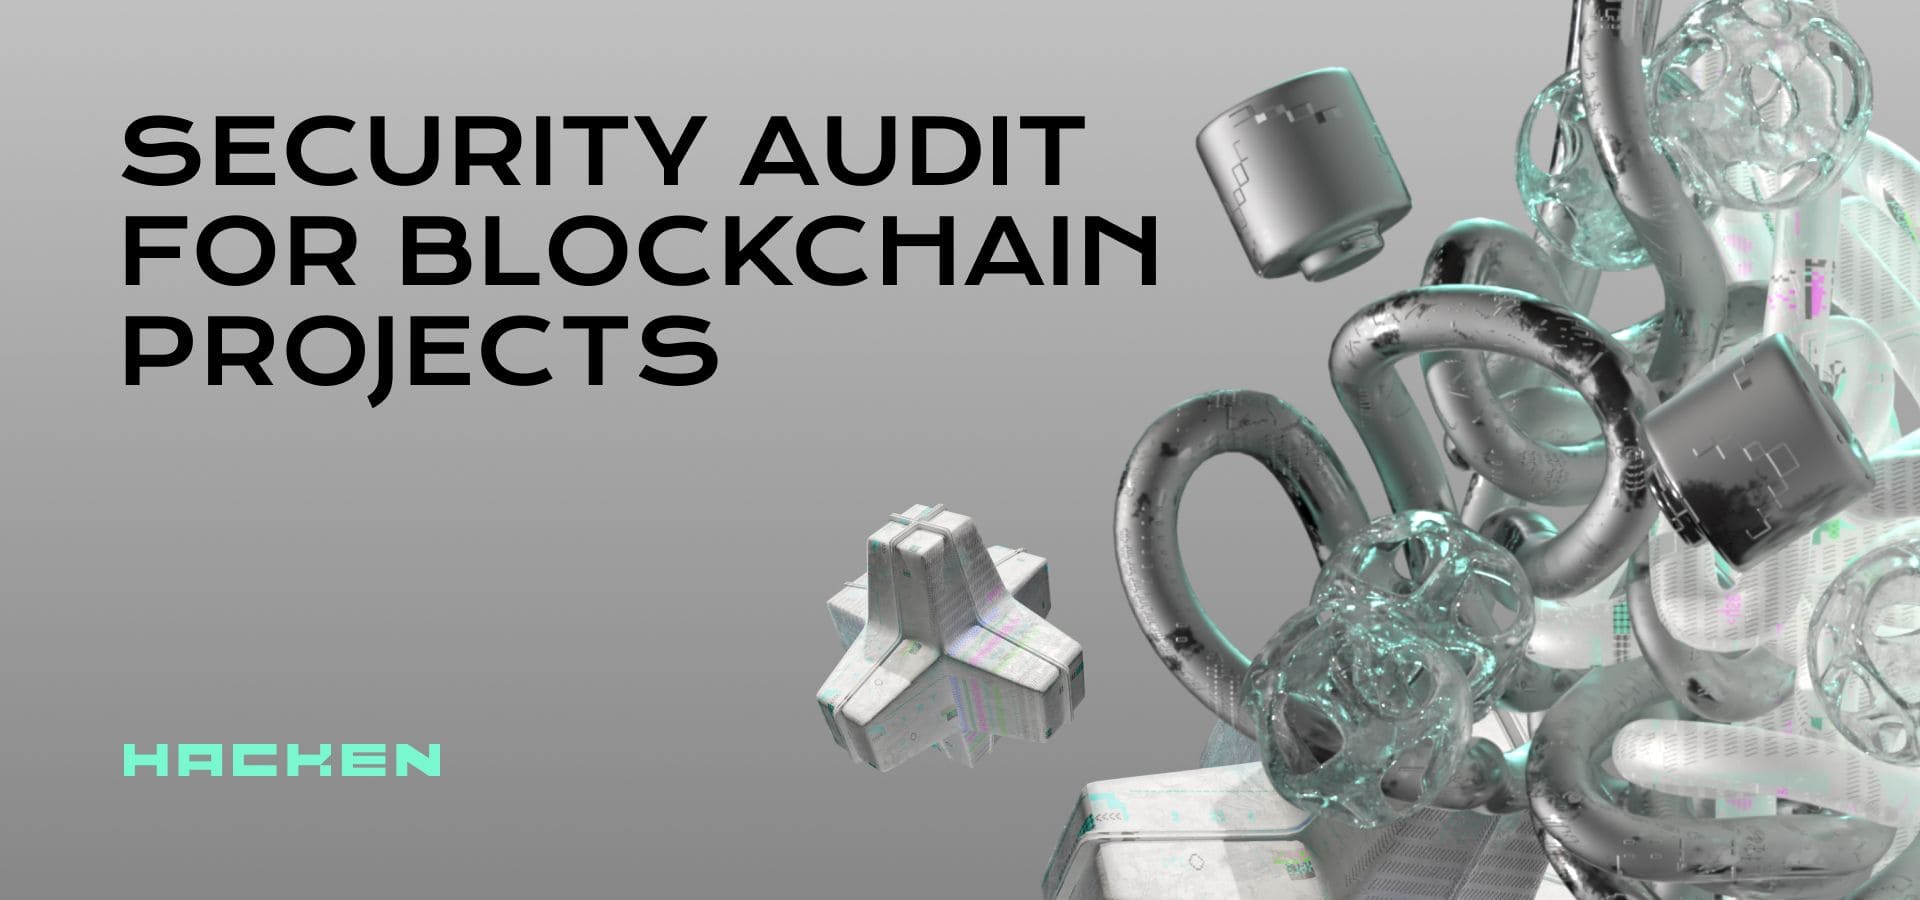 Security Audit For Blockchain Projects